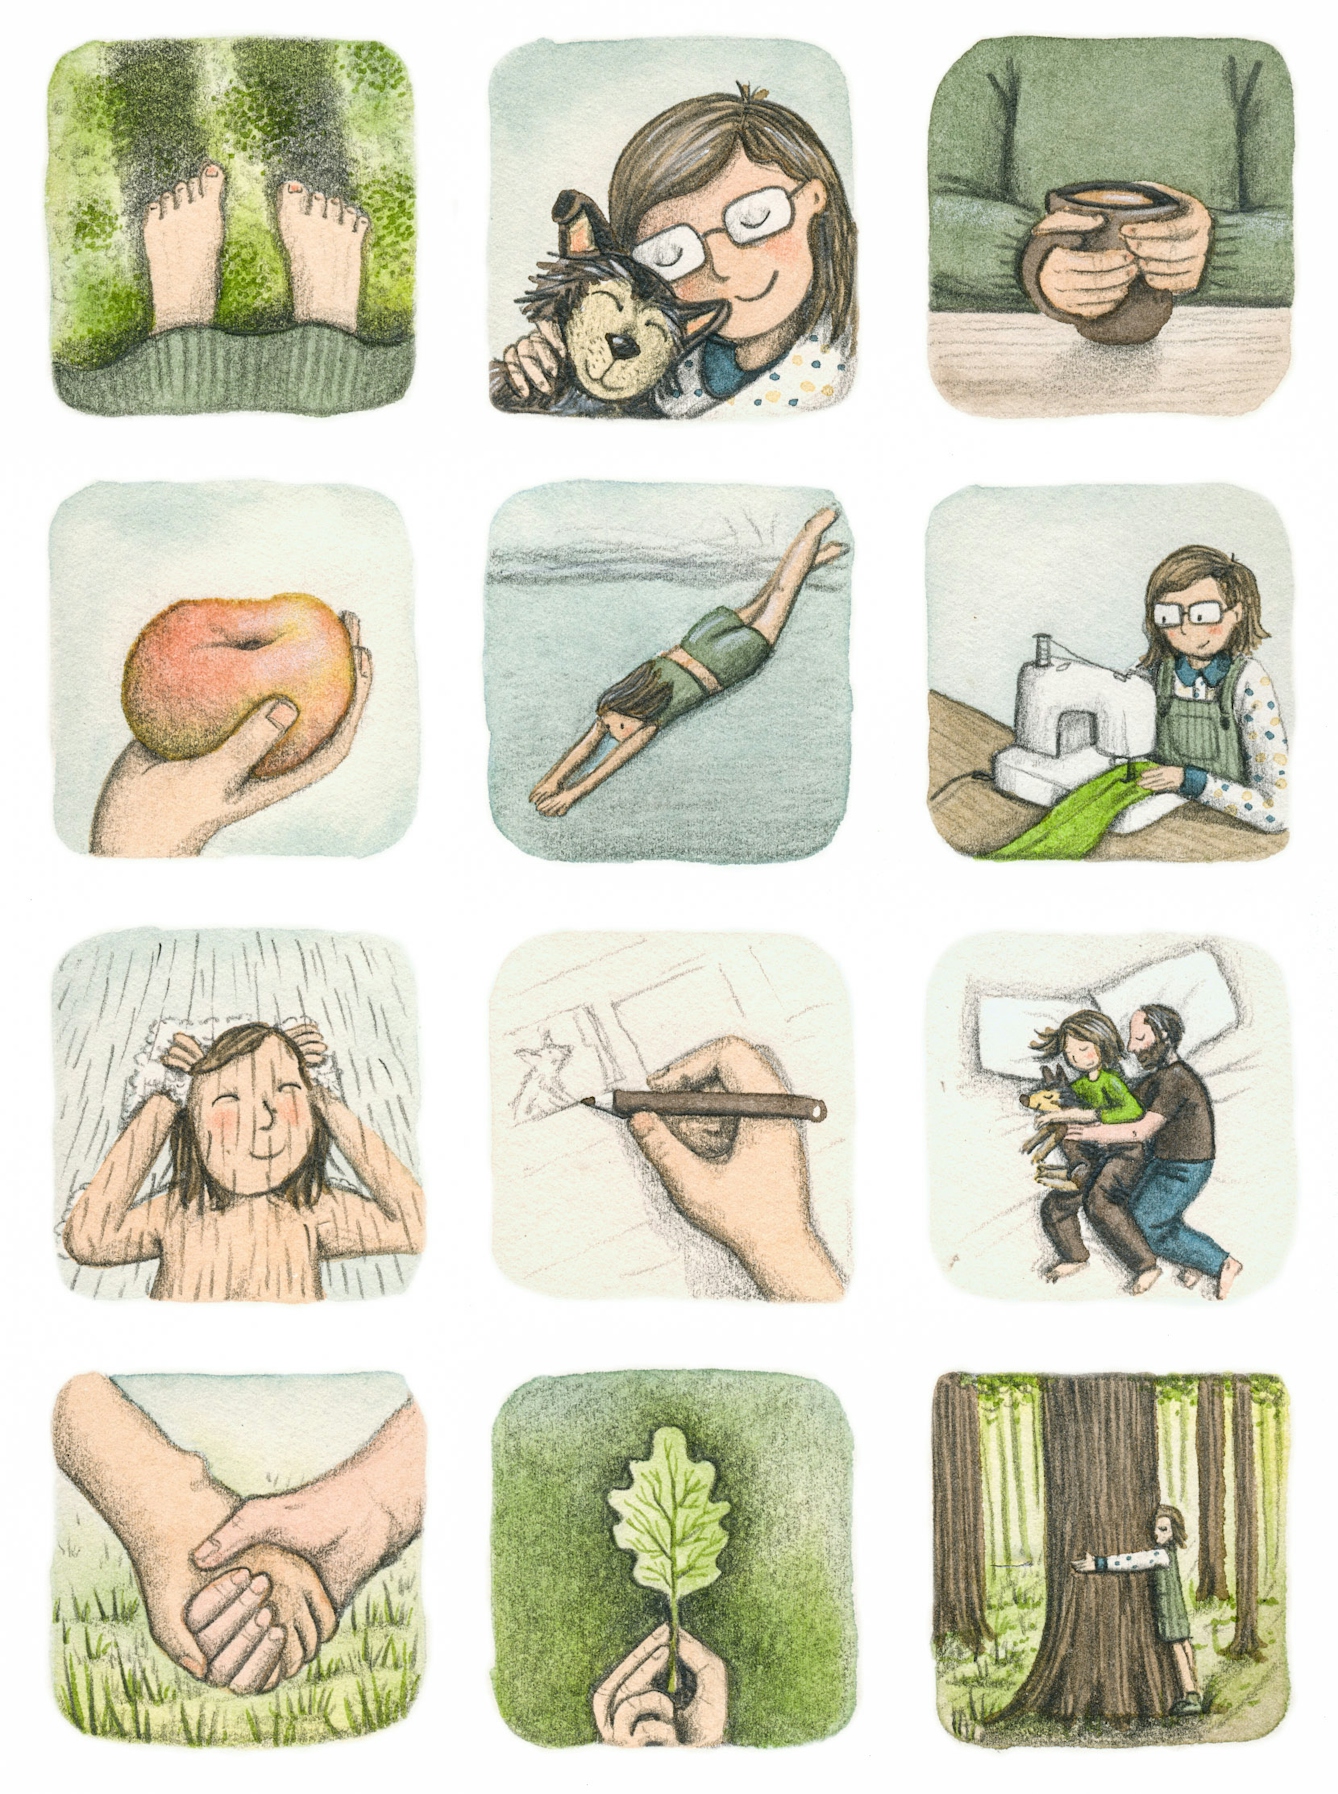 Colourful illustration with 12 square panels in a 3 by 4 grid. 

Panel 1 shows feet standing on grass. 

Panel 2 shows a person with glasses smiling and holding a small brown dog. 

Panel 3 shows a pair of hands holding a mug of tea. 

Panel 4 shows a hand holding an apple. 

Panel 5 shows a person lying on a light blue floor wearing a green t-shirt and shorts. 

Panel 6 shows a person wearing glasses and dungarees, using a sewing machine on a green fabric. 

Panel 7 shows a person standing under a shower smiling.

Panel 8 shows a hand holding a pencil, drawing in a sketchbook. 

Panel 9 shows 2 people and a dog hugging whilst lying in bed. 

Panel 10 shows two people holding hands. 

Panel 11 shows a hand holding up a single green leaf.

Panel 12 show a person hugging a tree.